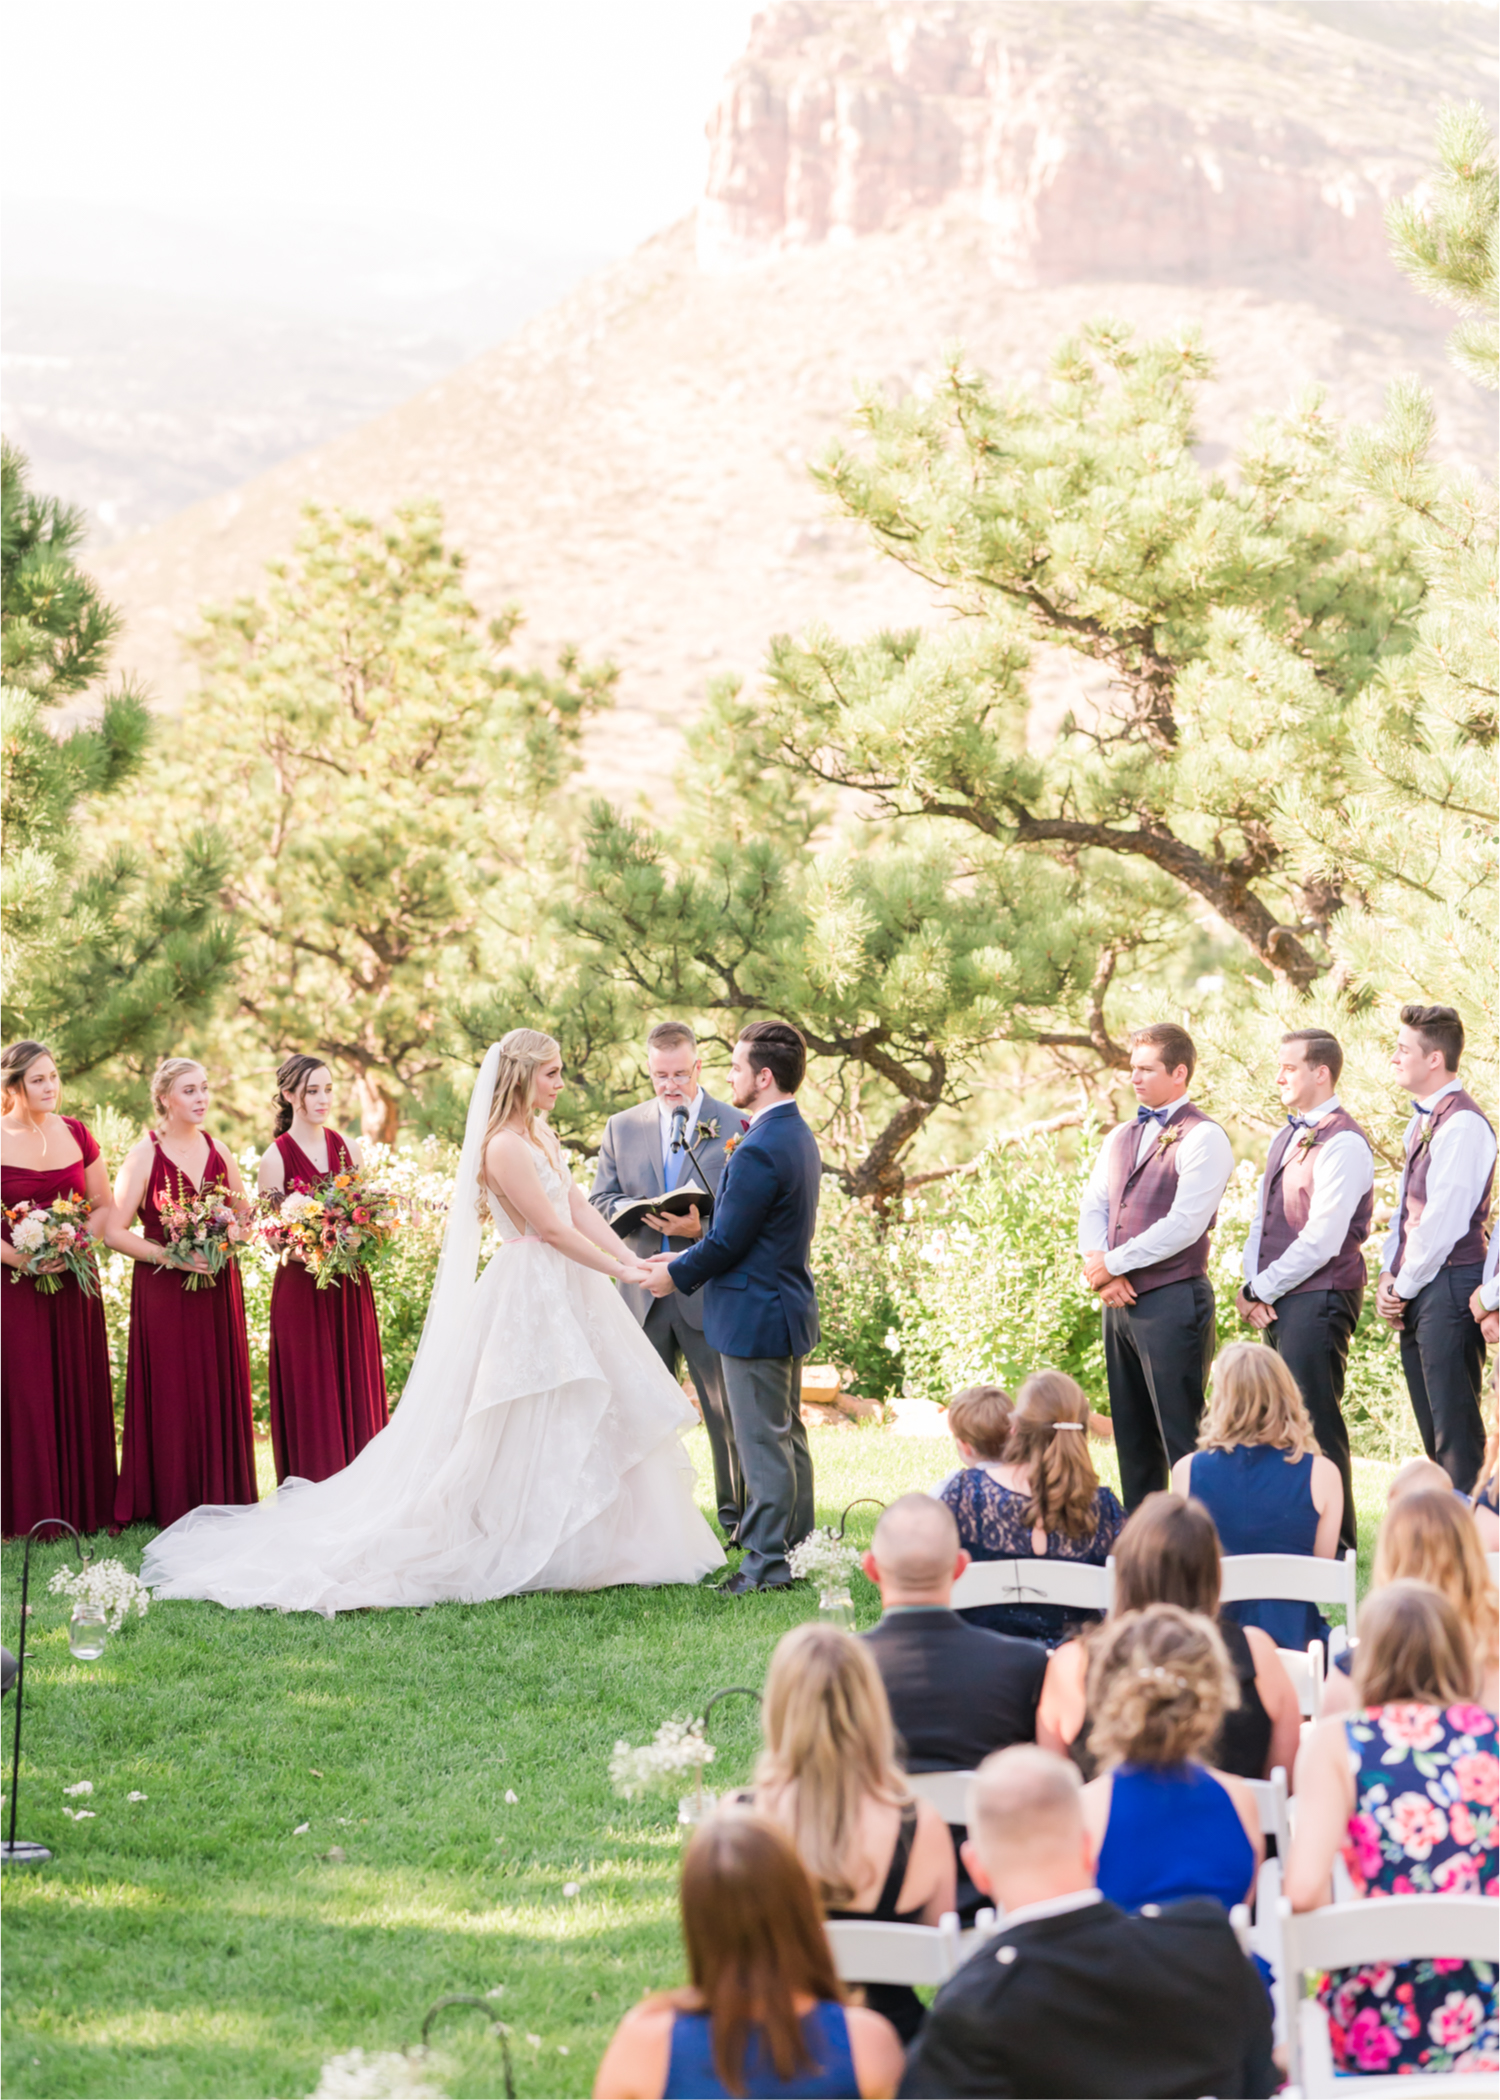 Romantic Whimsical Wedding at the Lionscrest Manor in Lyons, CO | Britni Girard Photography - Wedding Photo and Video Team | Rustic Fall Decor mixed in Burgundy, Blush, Gold and Sage | Wedding Dress from Anna Be Bridal by Hailey Paige | Hair and Makeup by Glam 5280 Chaundra Revier | Florals by Aflorae | Ceremony Site overlooking the Rocky Mountains | Mountaintop Ceremony before Sunset